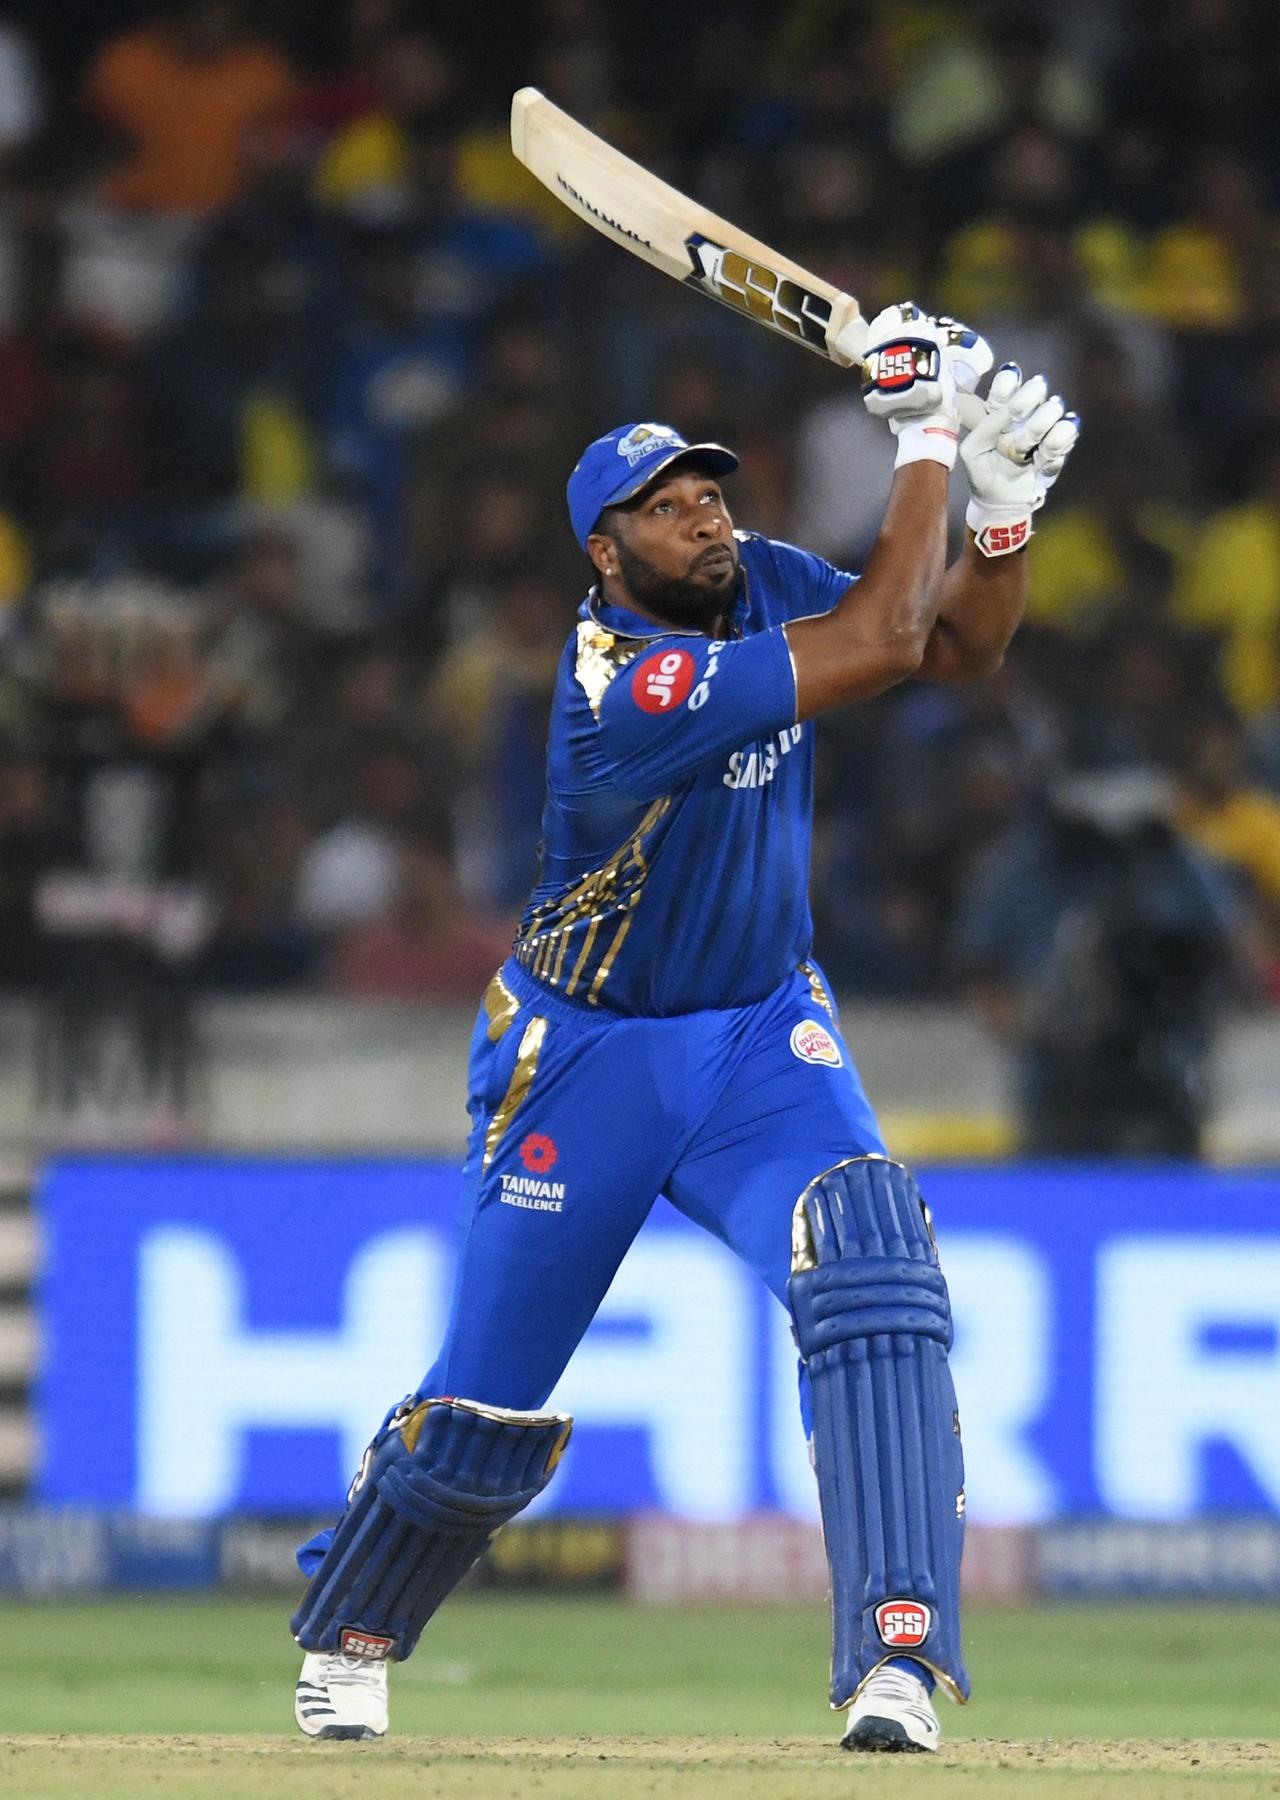 Mumbai Indians' Kieron Pollard did a fabulous job to restrict Punjab Kings to 135 with a brilliant 2 wickets for just 8 runs during his spell.  Saurabh Tiwary's 45 then helped to see Mumbai Indians through to victory but it was Pollard who won the man-of-the-match